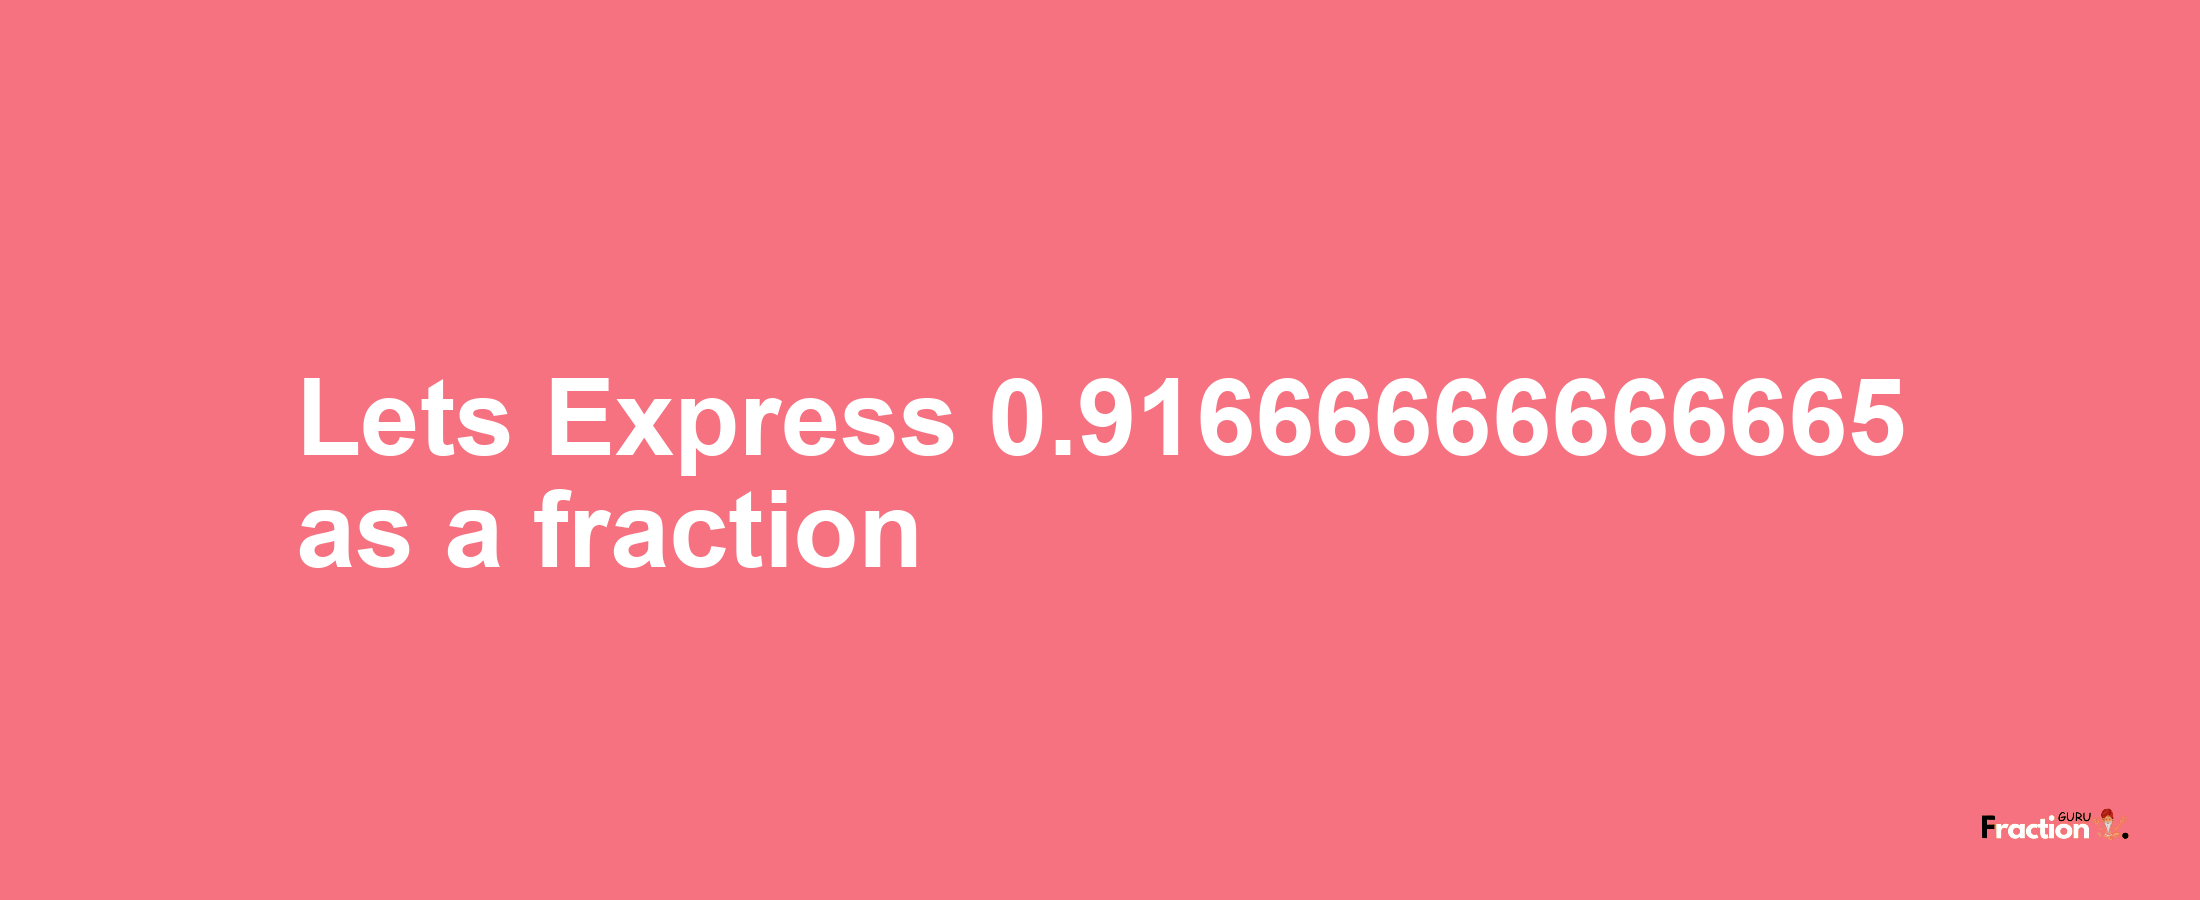 Lets Express 0.91666666666665 as afraction